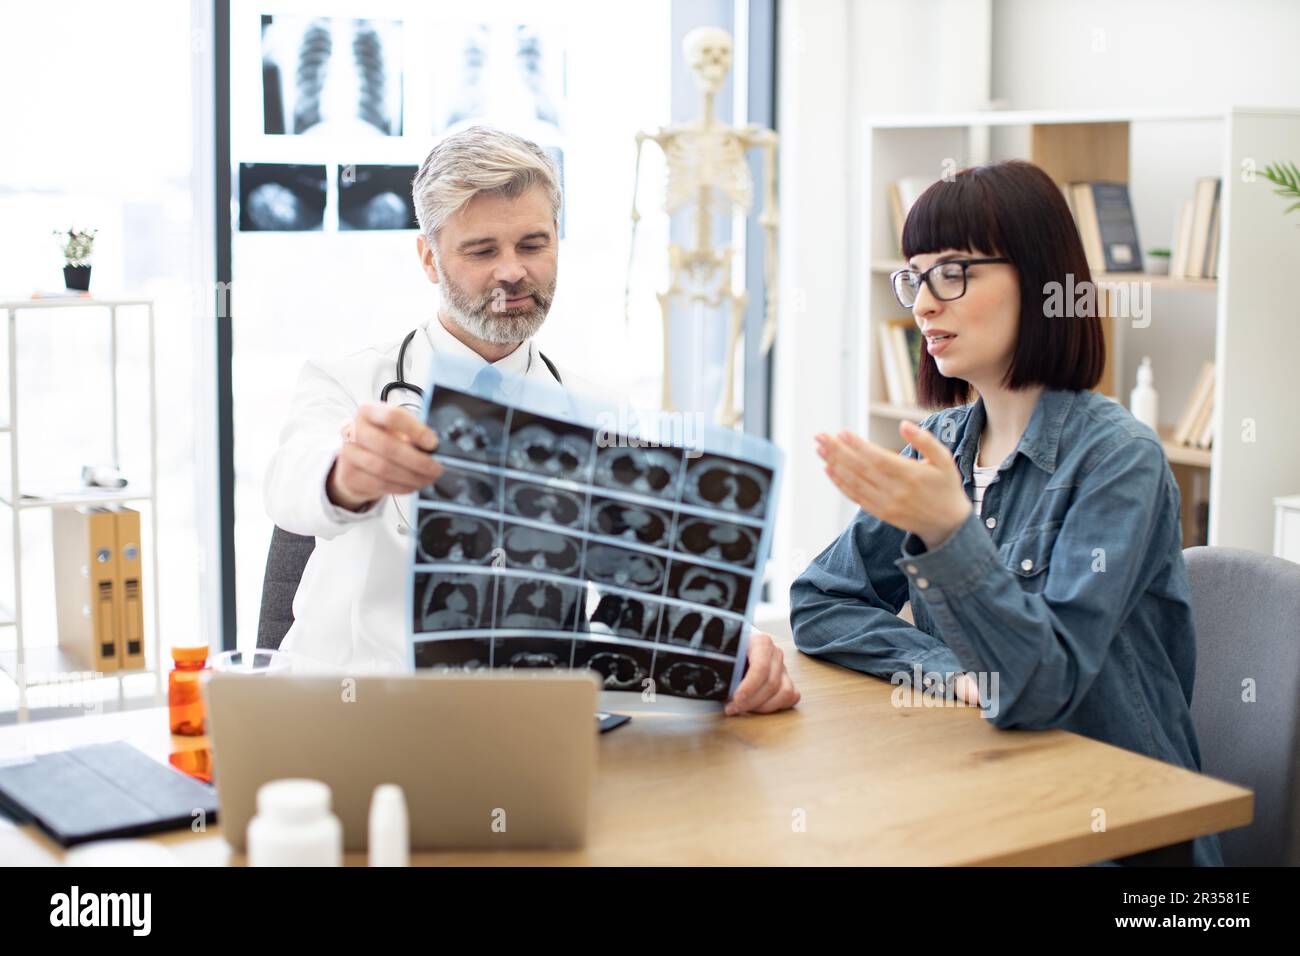 Mindful gray-haired male in lab coat holding MRI scans while brunette lady sitting next to him at desk in hospital. Family doctor examining diagnostic test results while developing treatment plan. Stock Photo